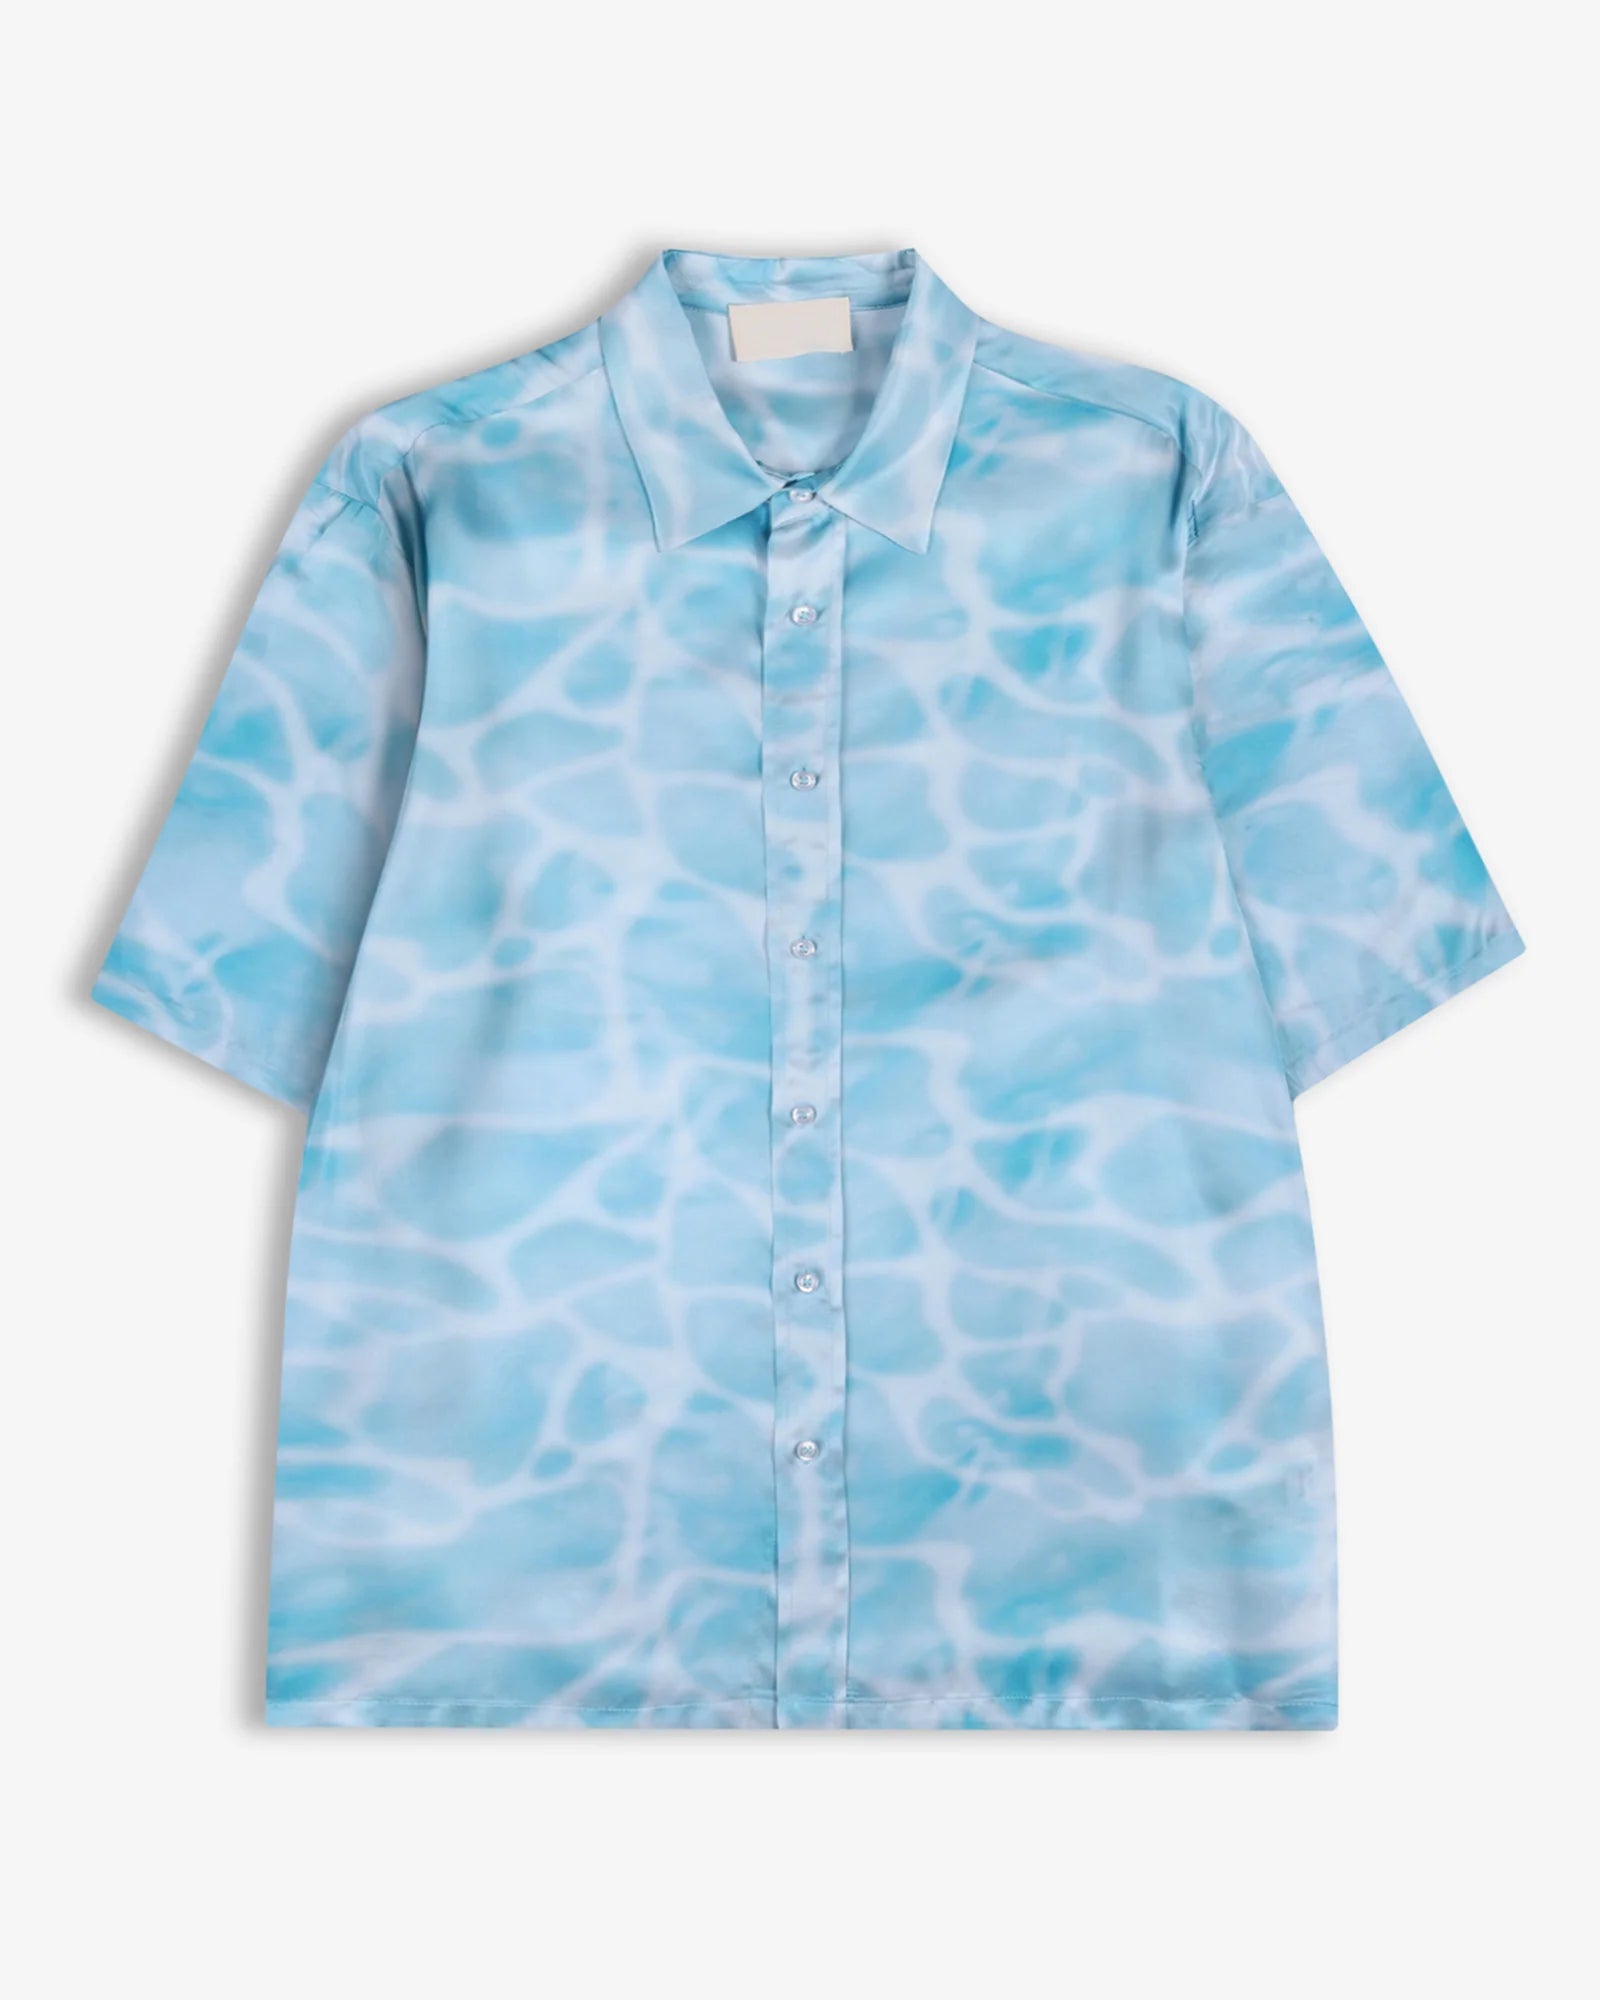 C.9.3. Men's Shirt With Water Effect Print